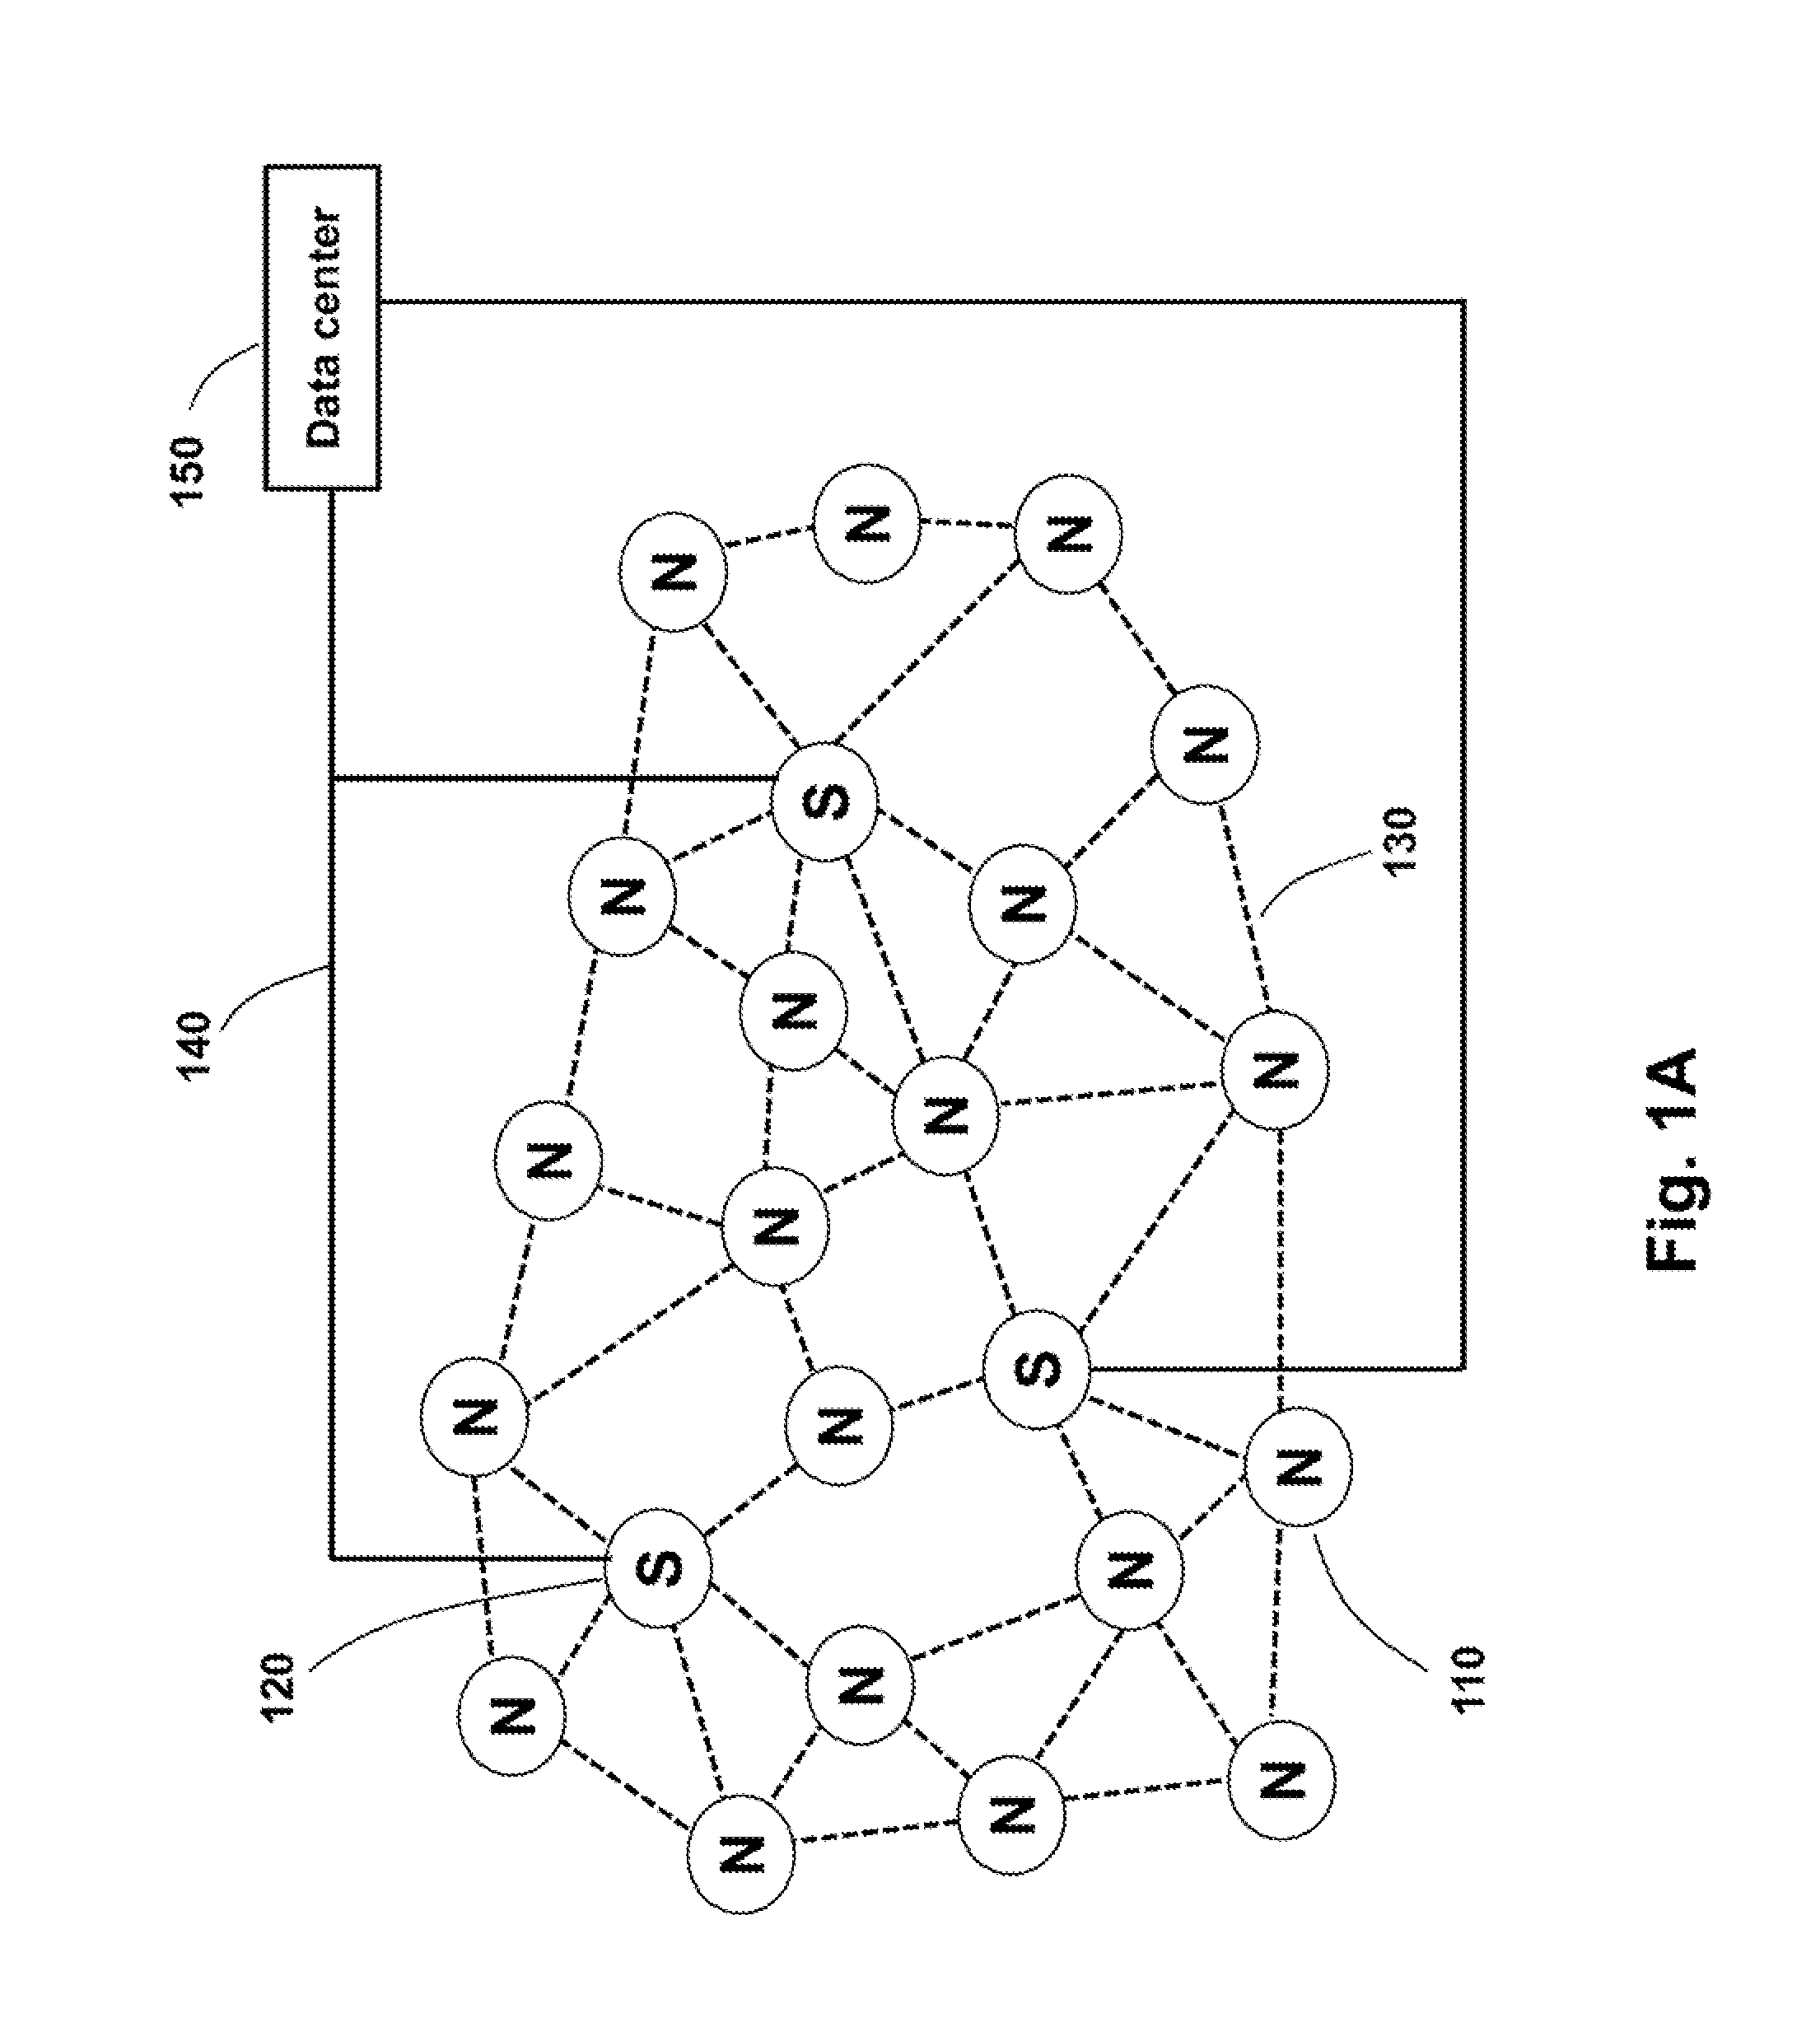 Synchronized Multi-Sink Routing for Wireless Networks